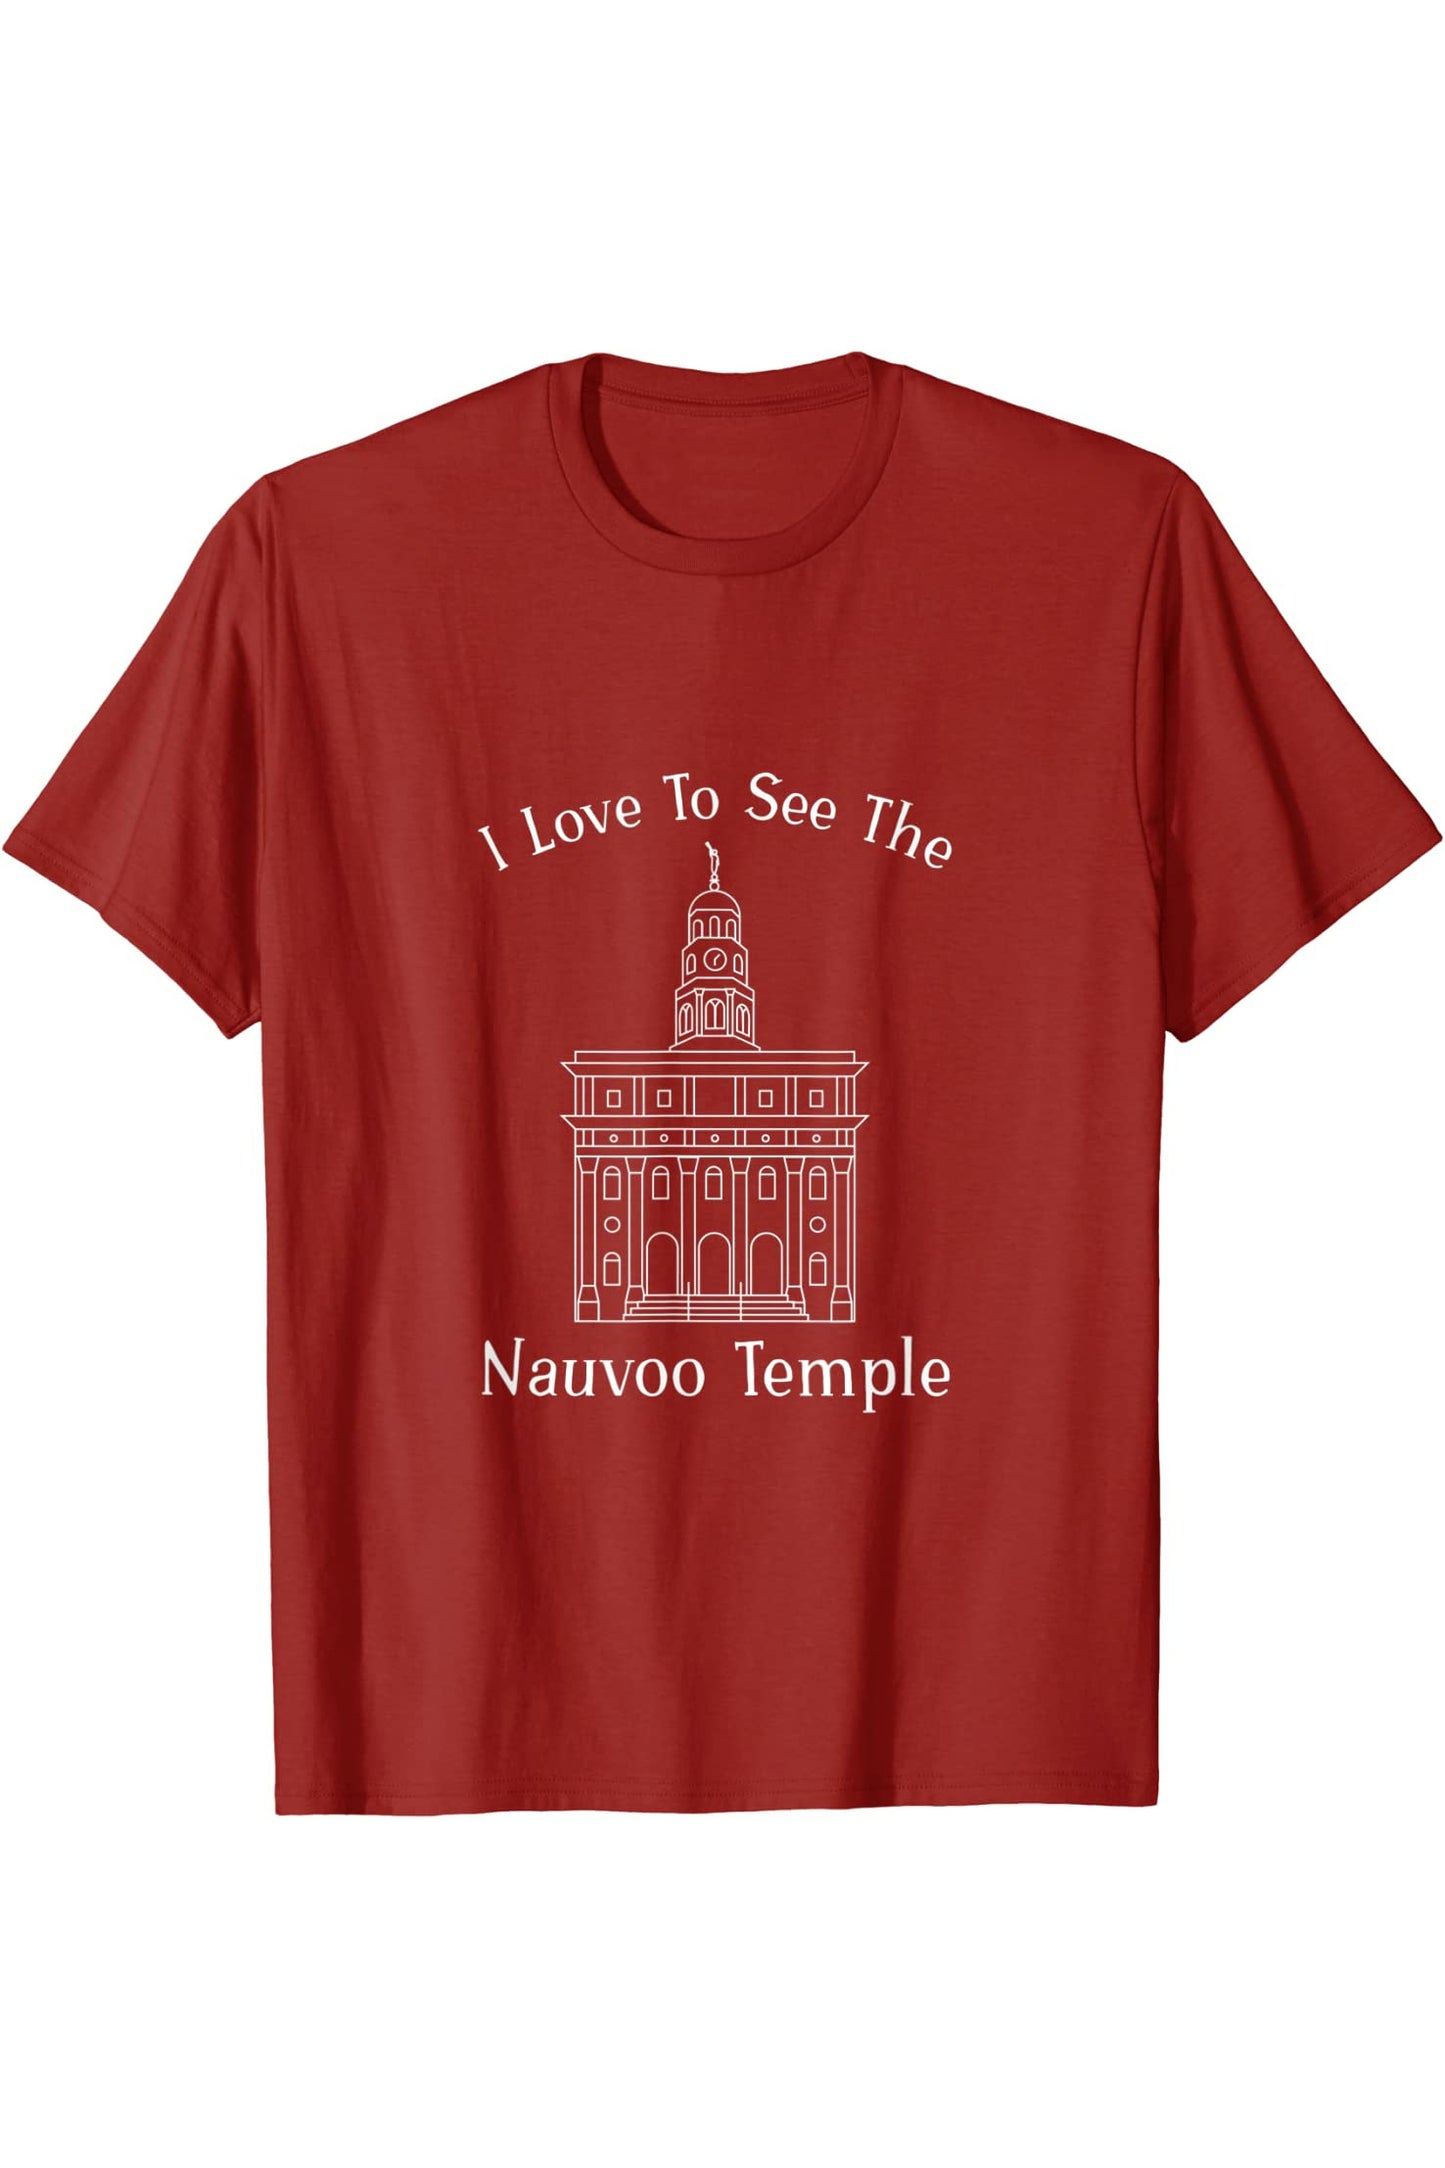 Nauvoo IL Tempel, I love to see my temple, happy T-Shirt